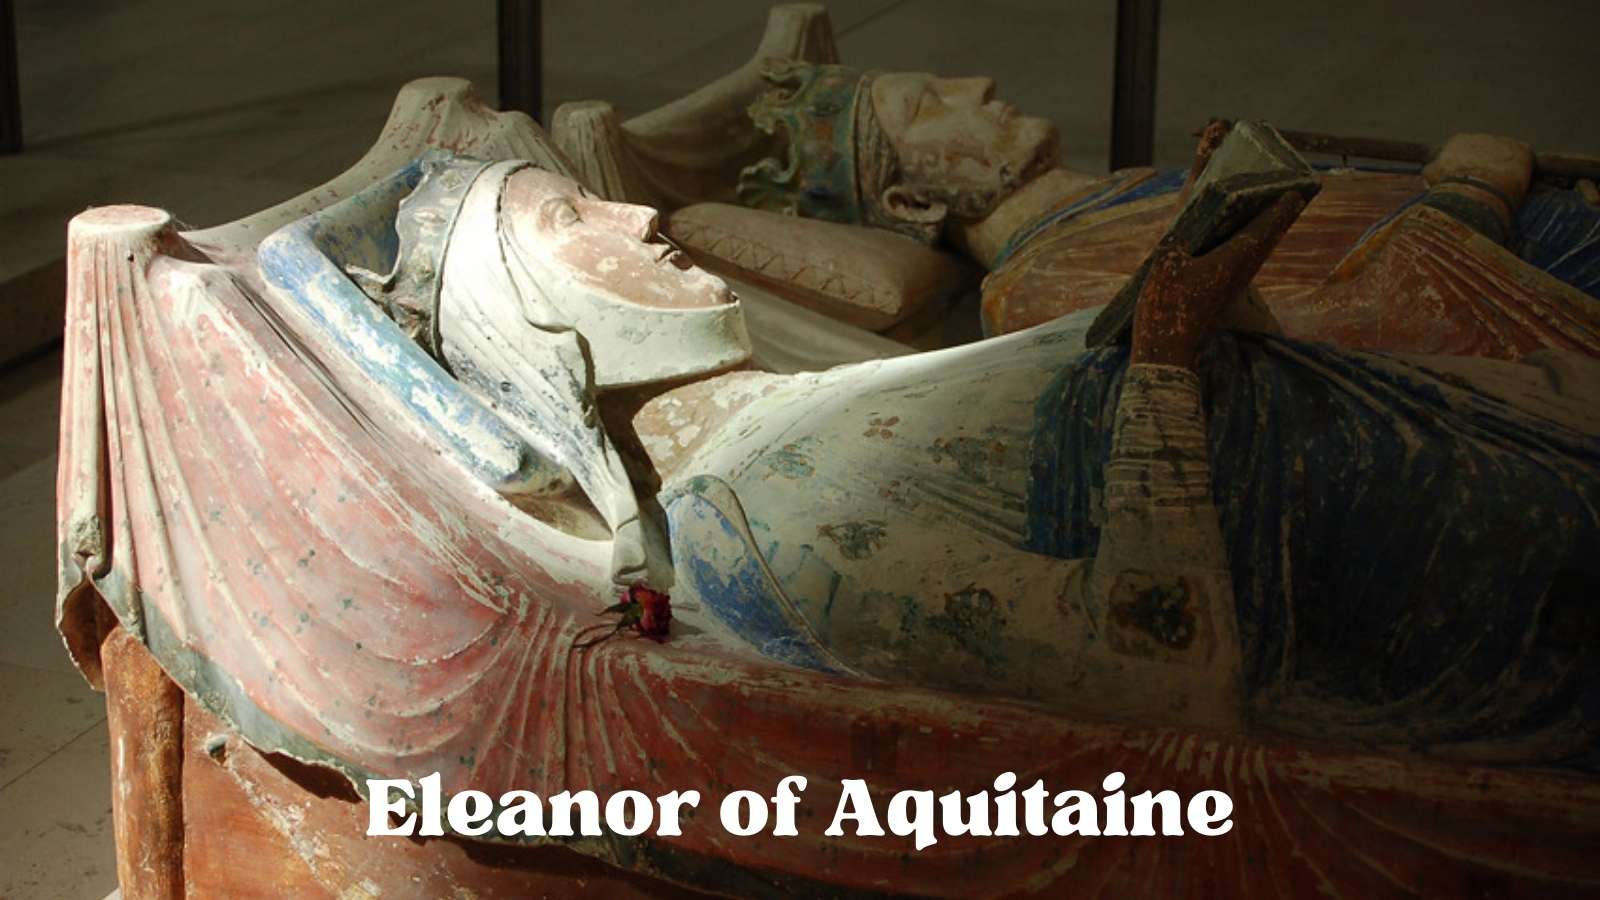 Eleanor of Aquitaine in her resting place at the Abbaye de Fontevraud